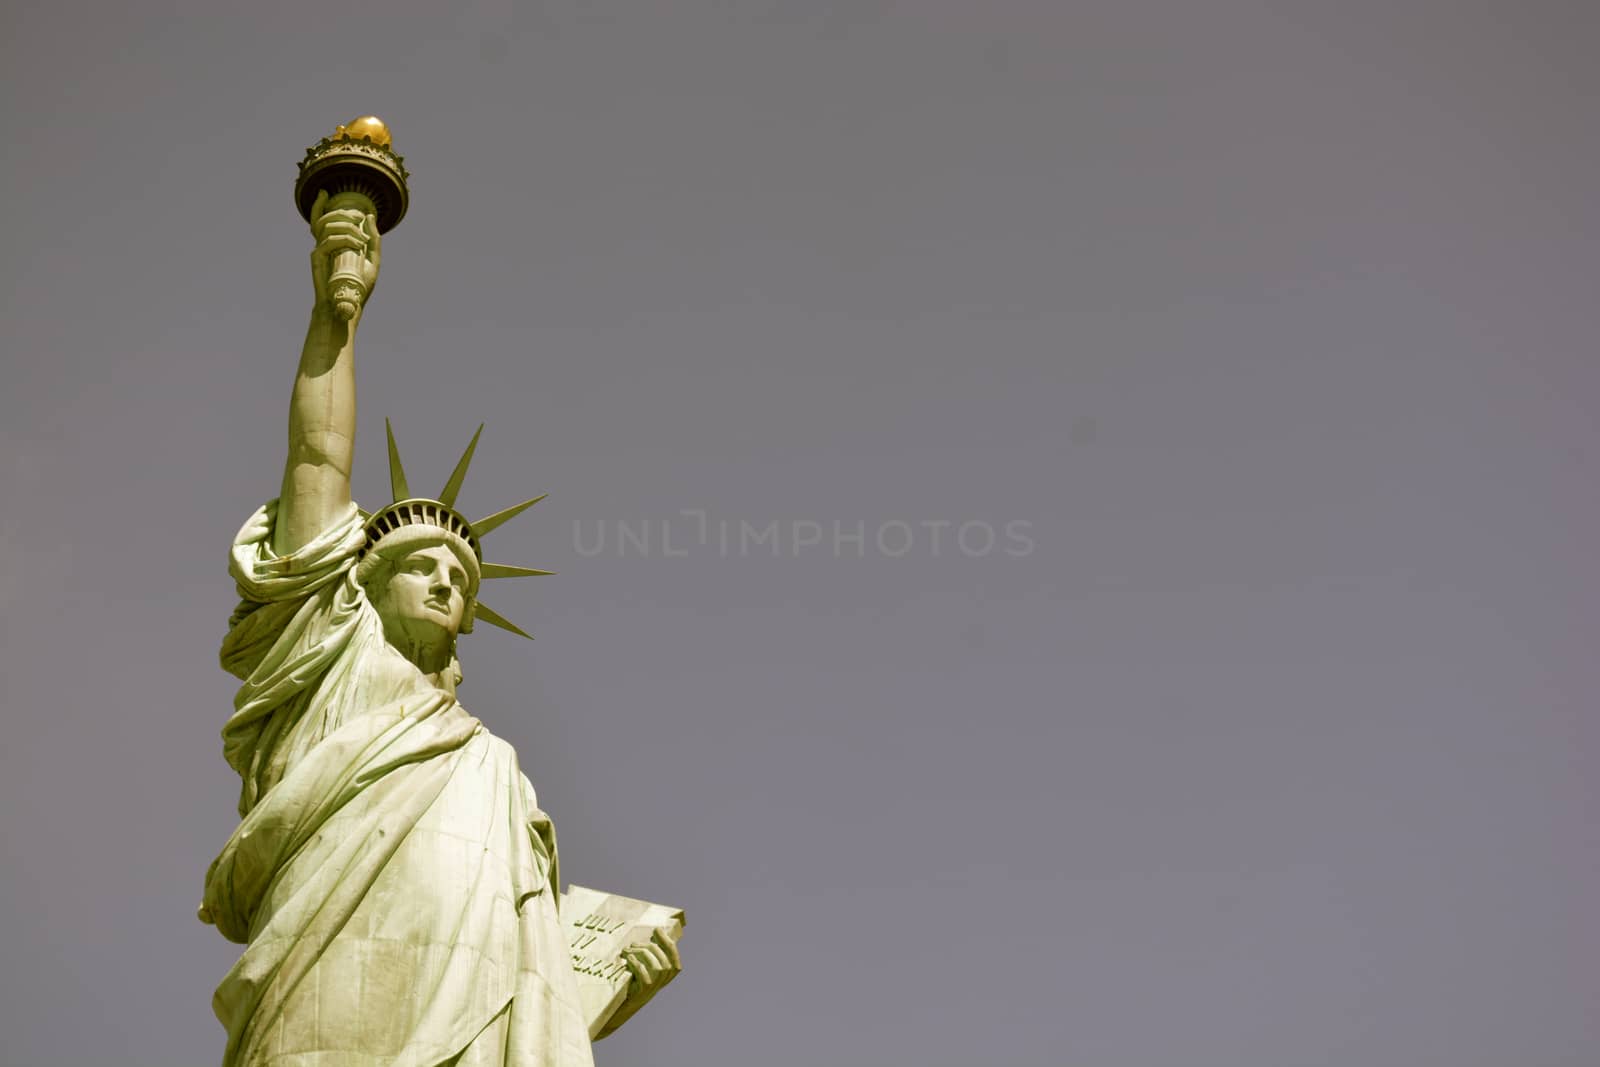 Statue of Liberty - New York City  - 32 by RefocusPhoto